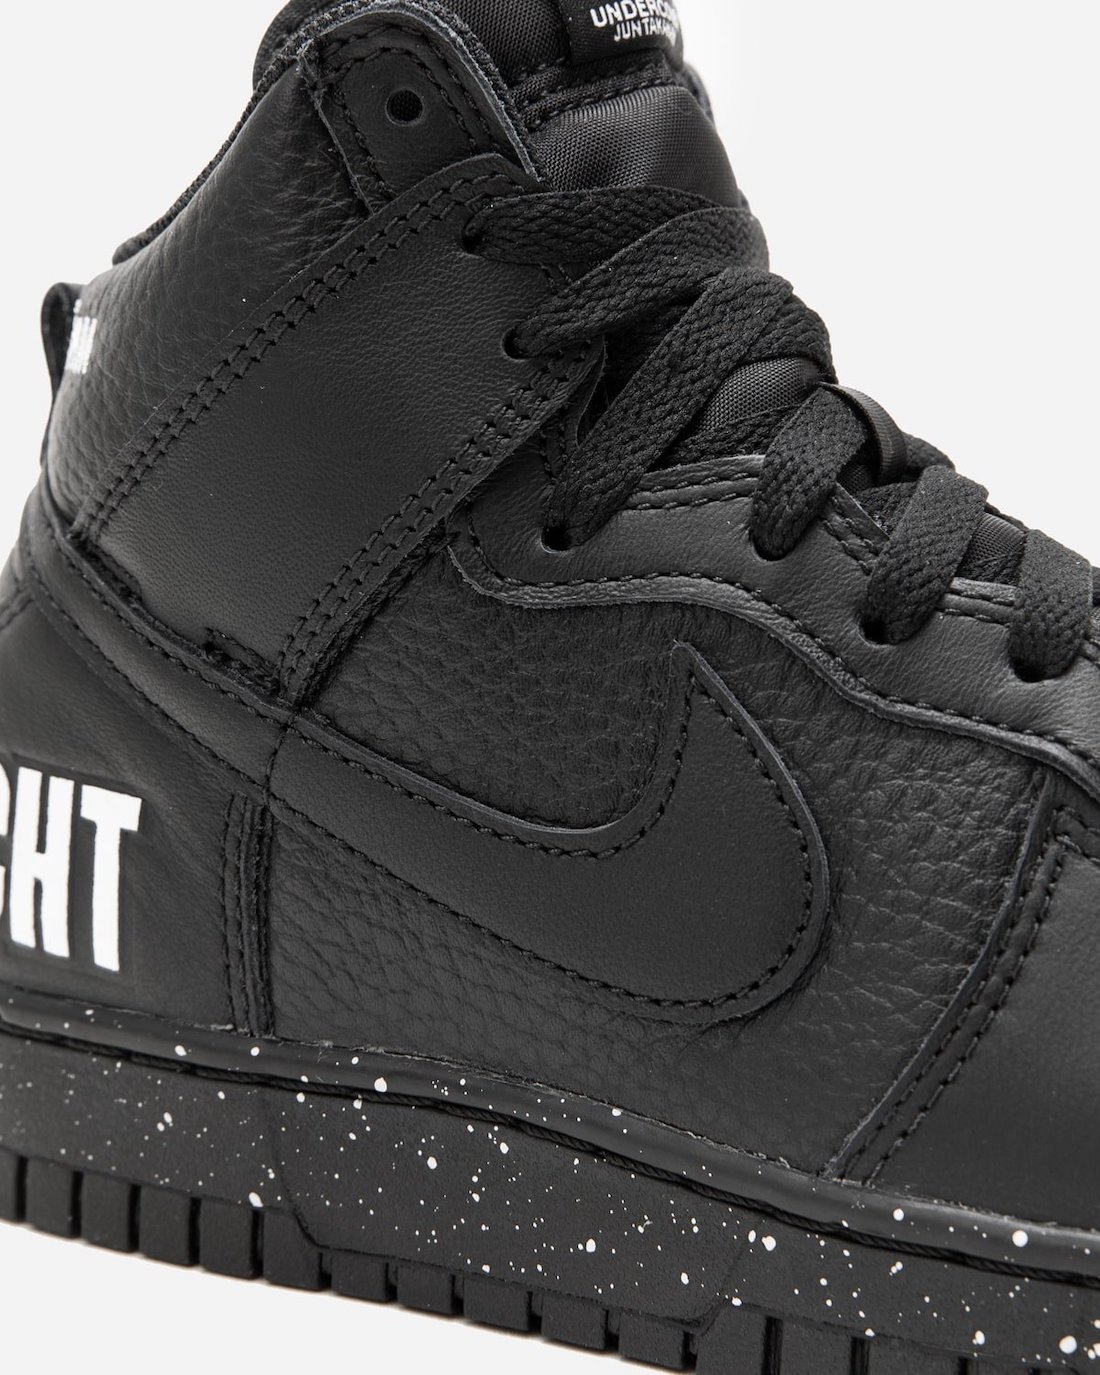 Undercover Nike Dunk High Chaos Release Date 4